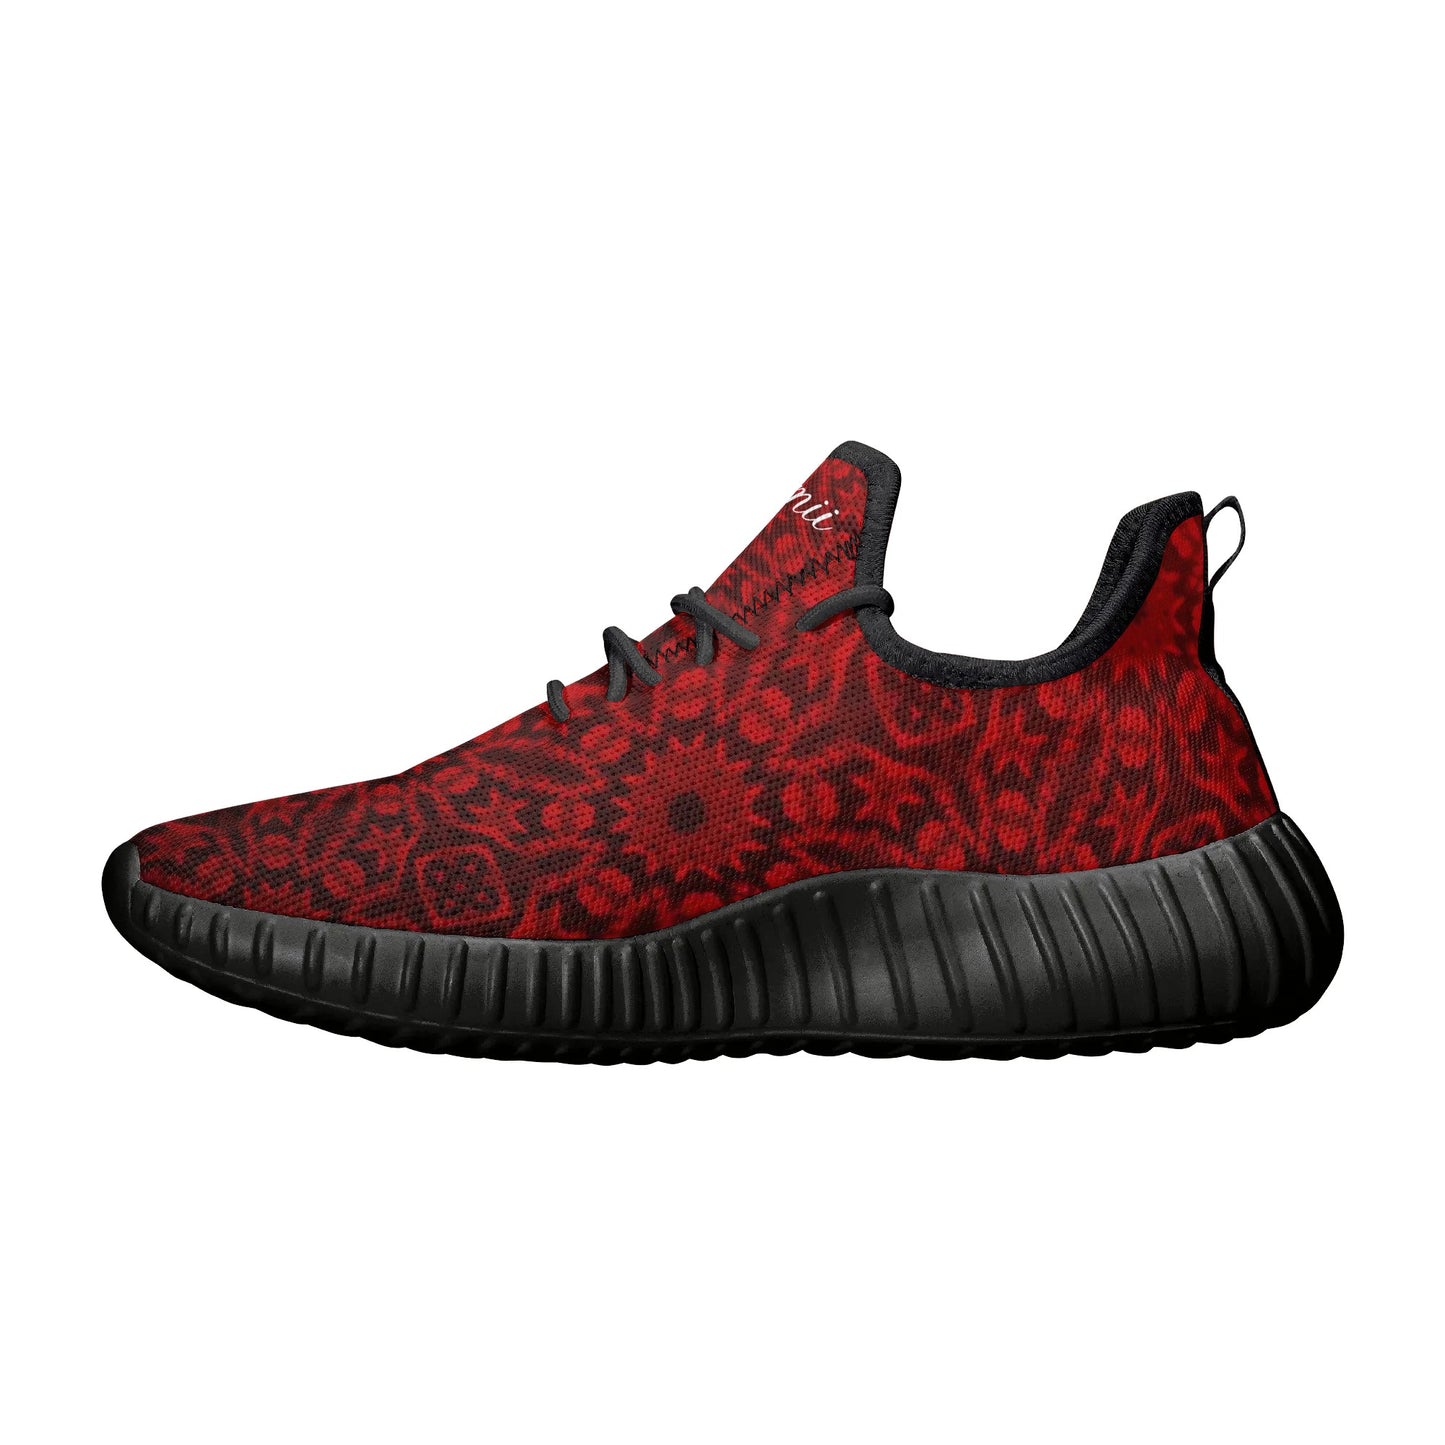 Mens DuGamii Red Knight Mesh Knit Sneakers